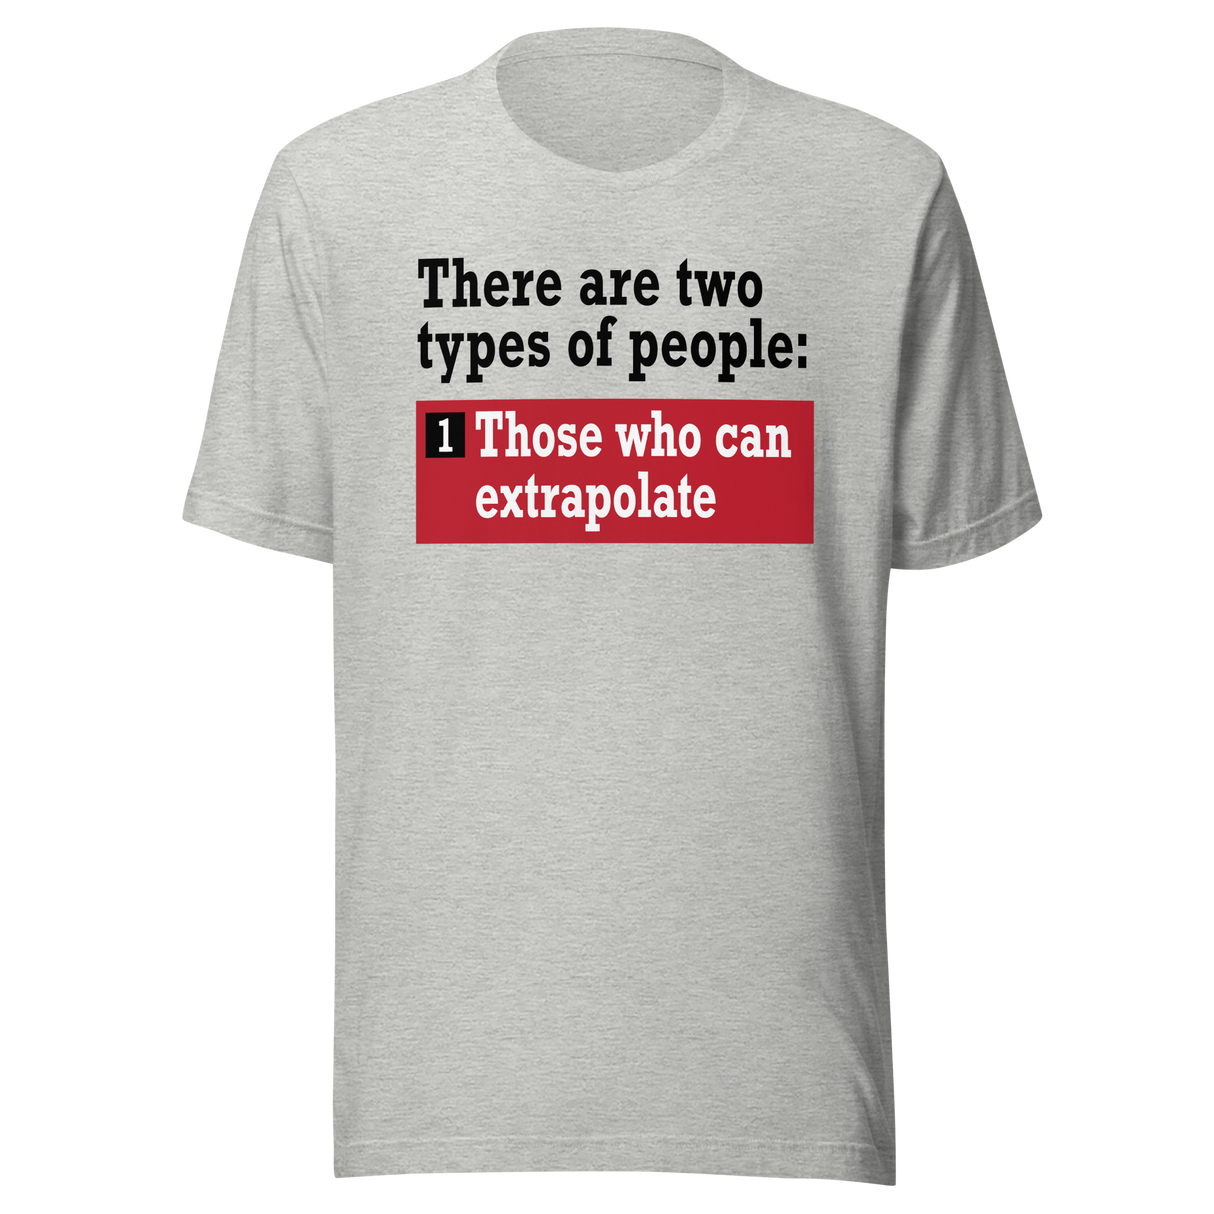 there-are-two-types-of-people-those-who-can-extrapolate-and-humor-tee-playful-t-shirt-joke-tee-t-shirt-tee#color_athletic-heather